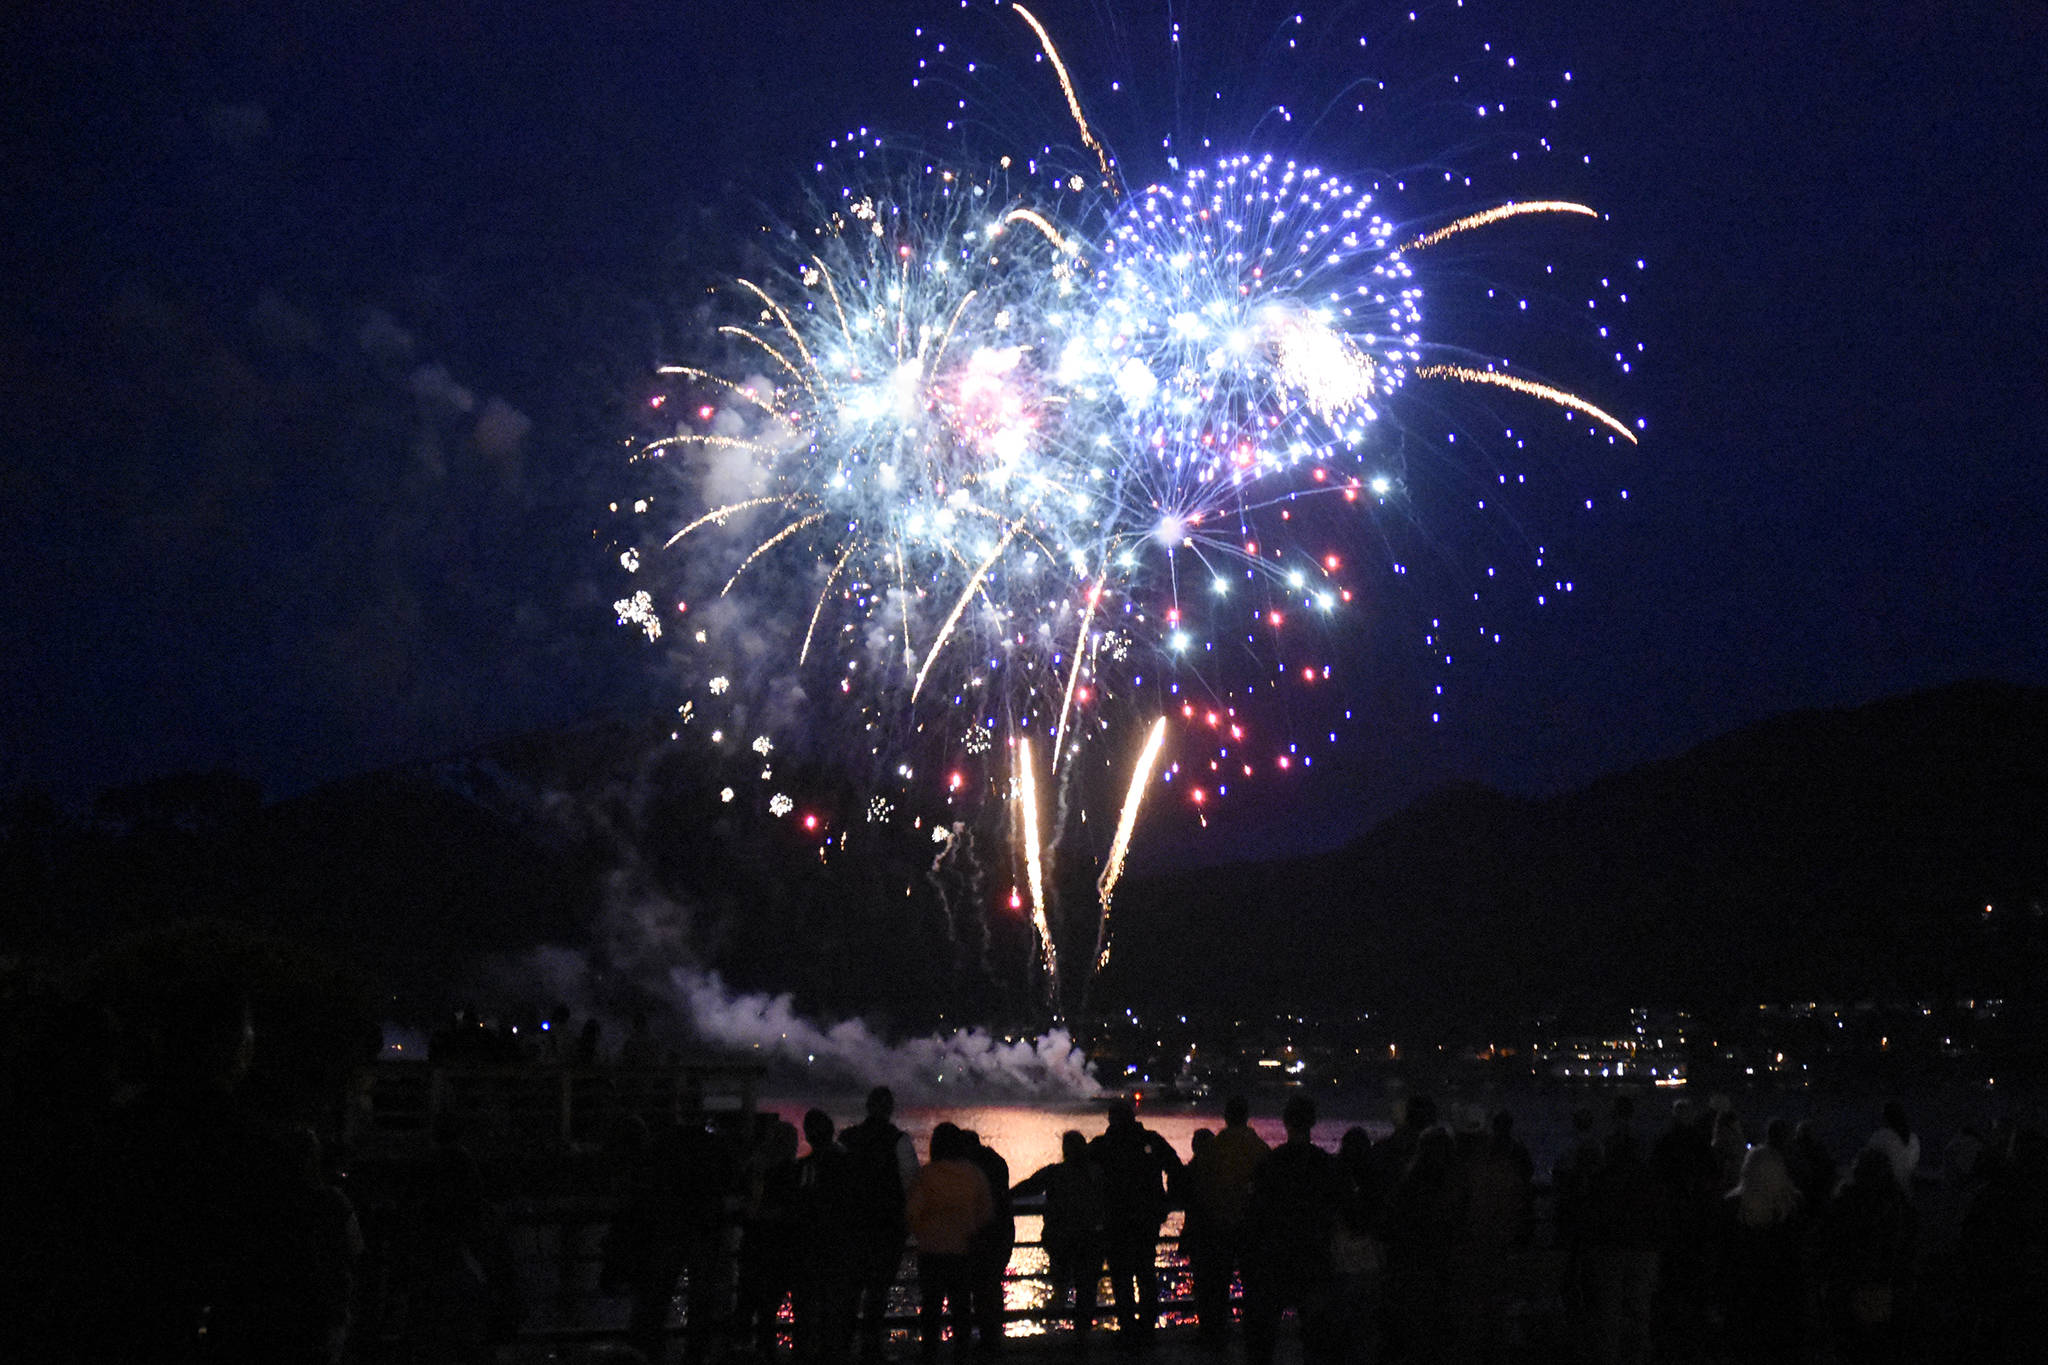 Fireworks light up the night sky over the Gastineau Channel with reds, whites and blues in the early hours of the Fourth of July. (Peter Segall / Juneau Empire)